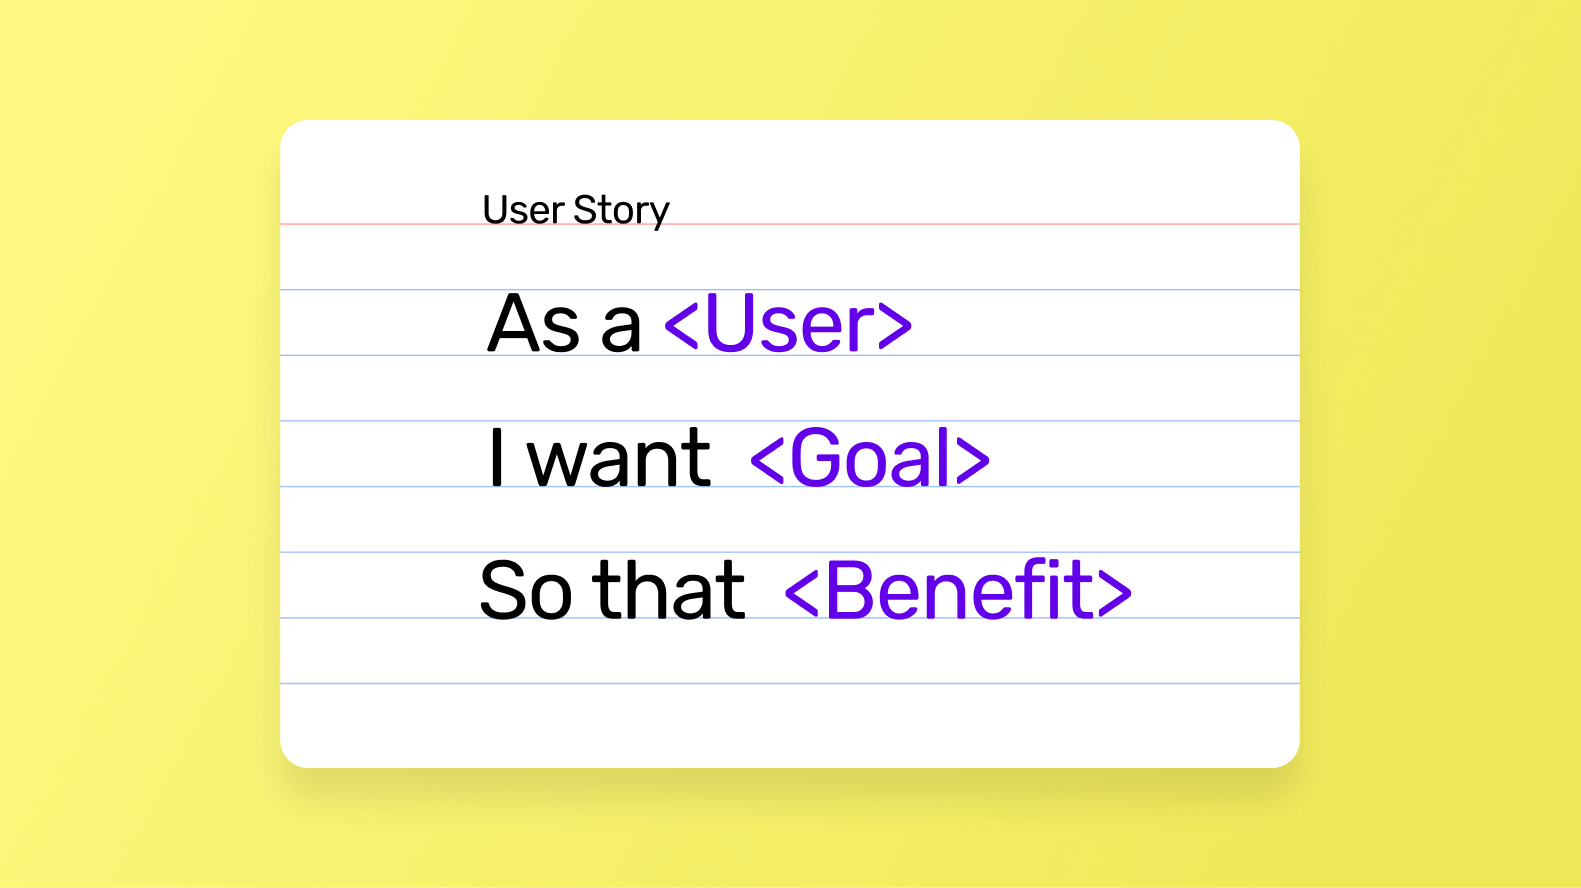 An example of an app user story highlighting components of a user story, user, goal and benefit